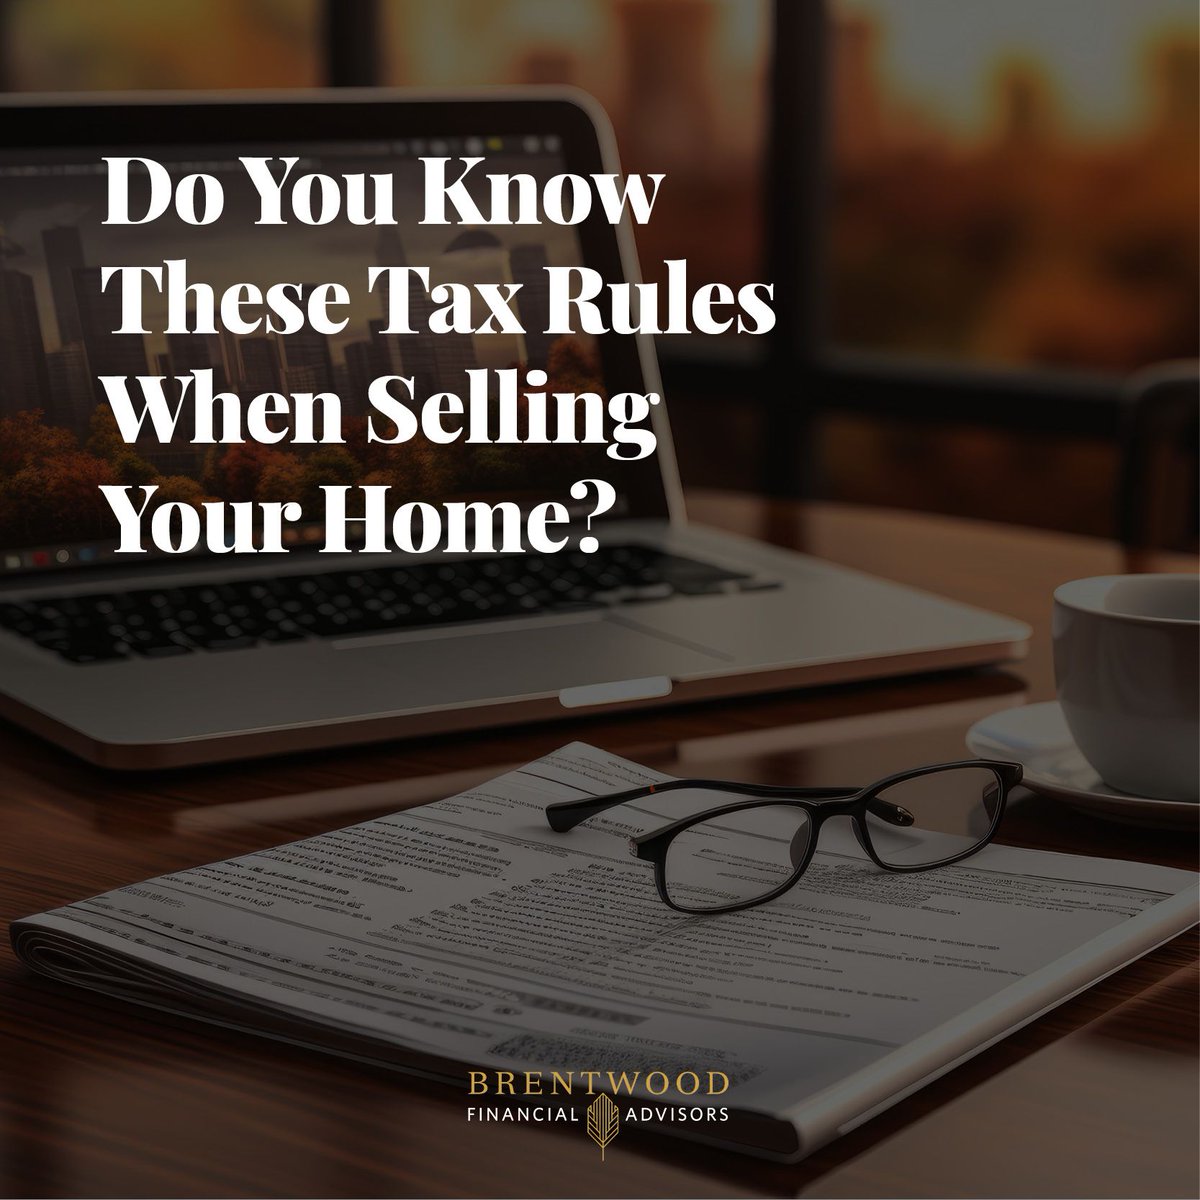 How the gains from the sale of a primary residence are taxed has changed in recent years. If you have recently sold your home or are considering doing so, you may want to be aware of these new rules: bit.ly/3IV73Gd 

#BrentwoodFinancial #FinancialAdvisors #WealthAdvice